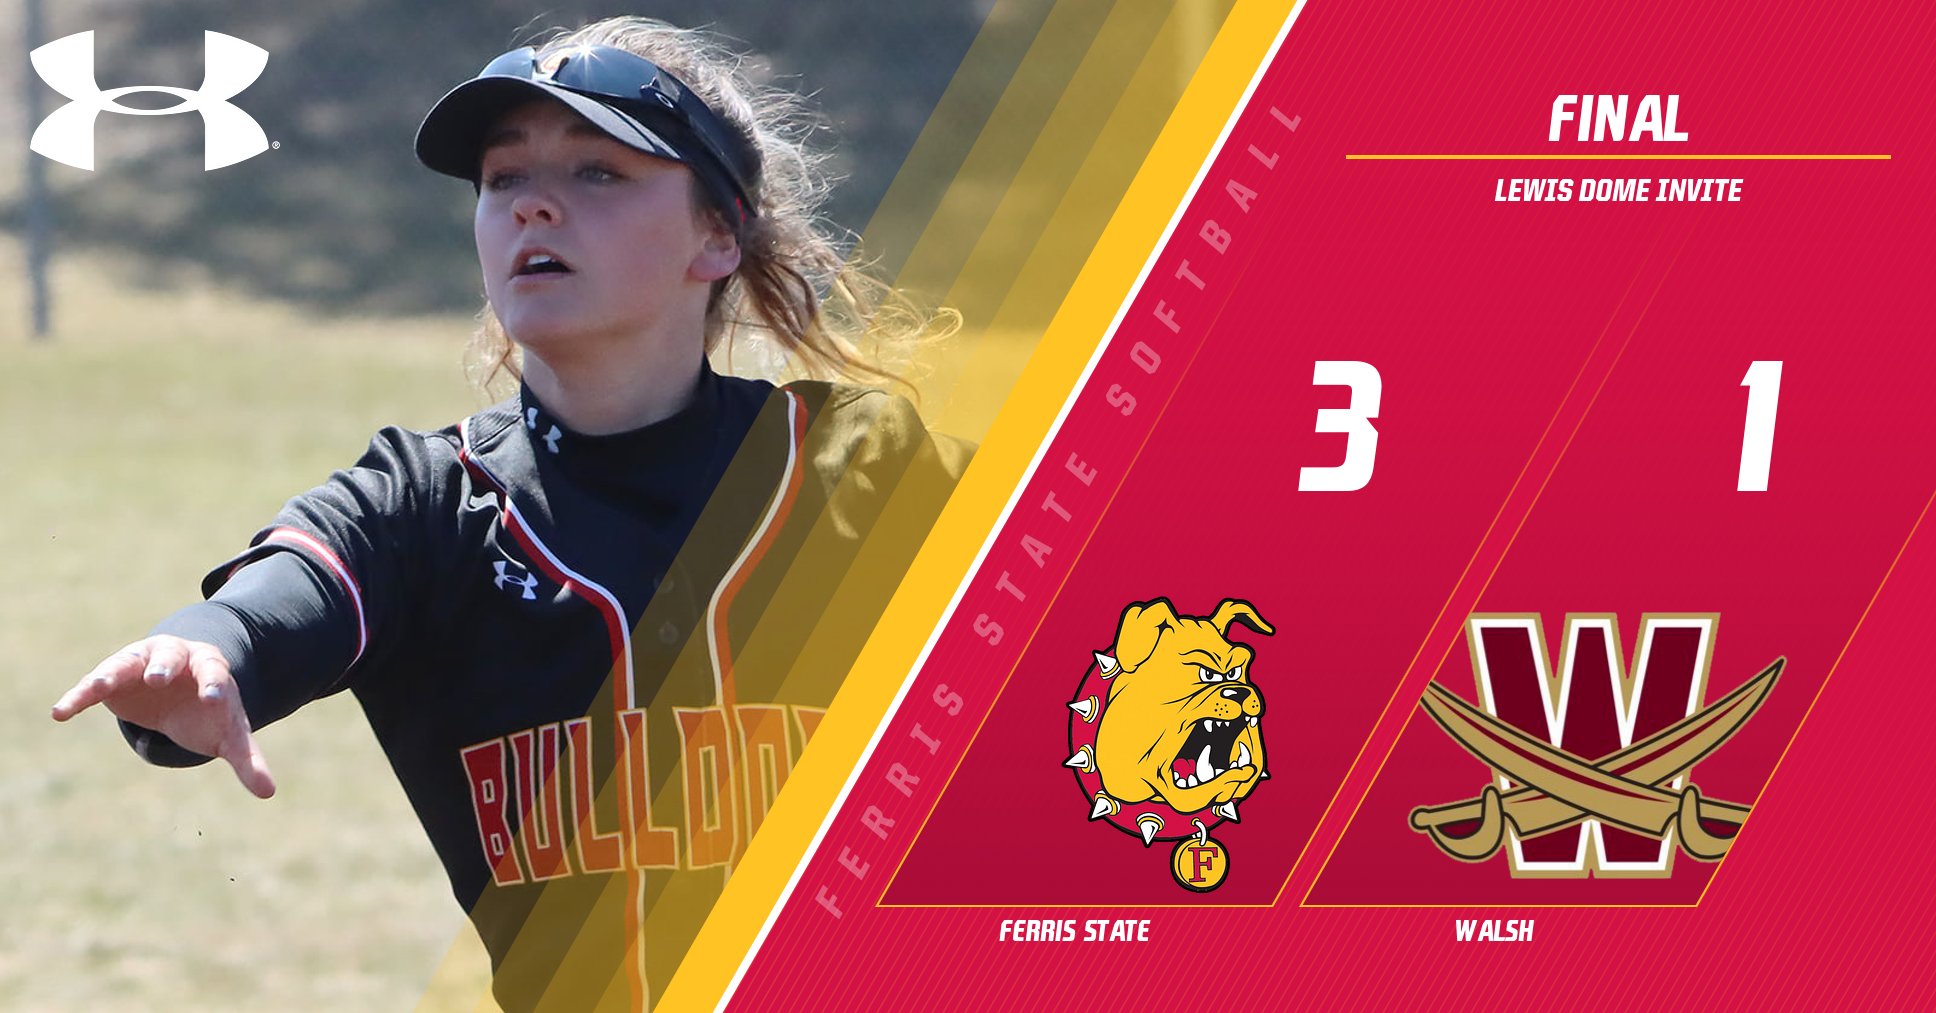 Bulldog Softball Closes Out Lewis Dome Invite With Victory